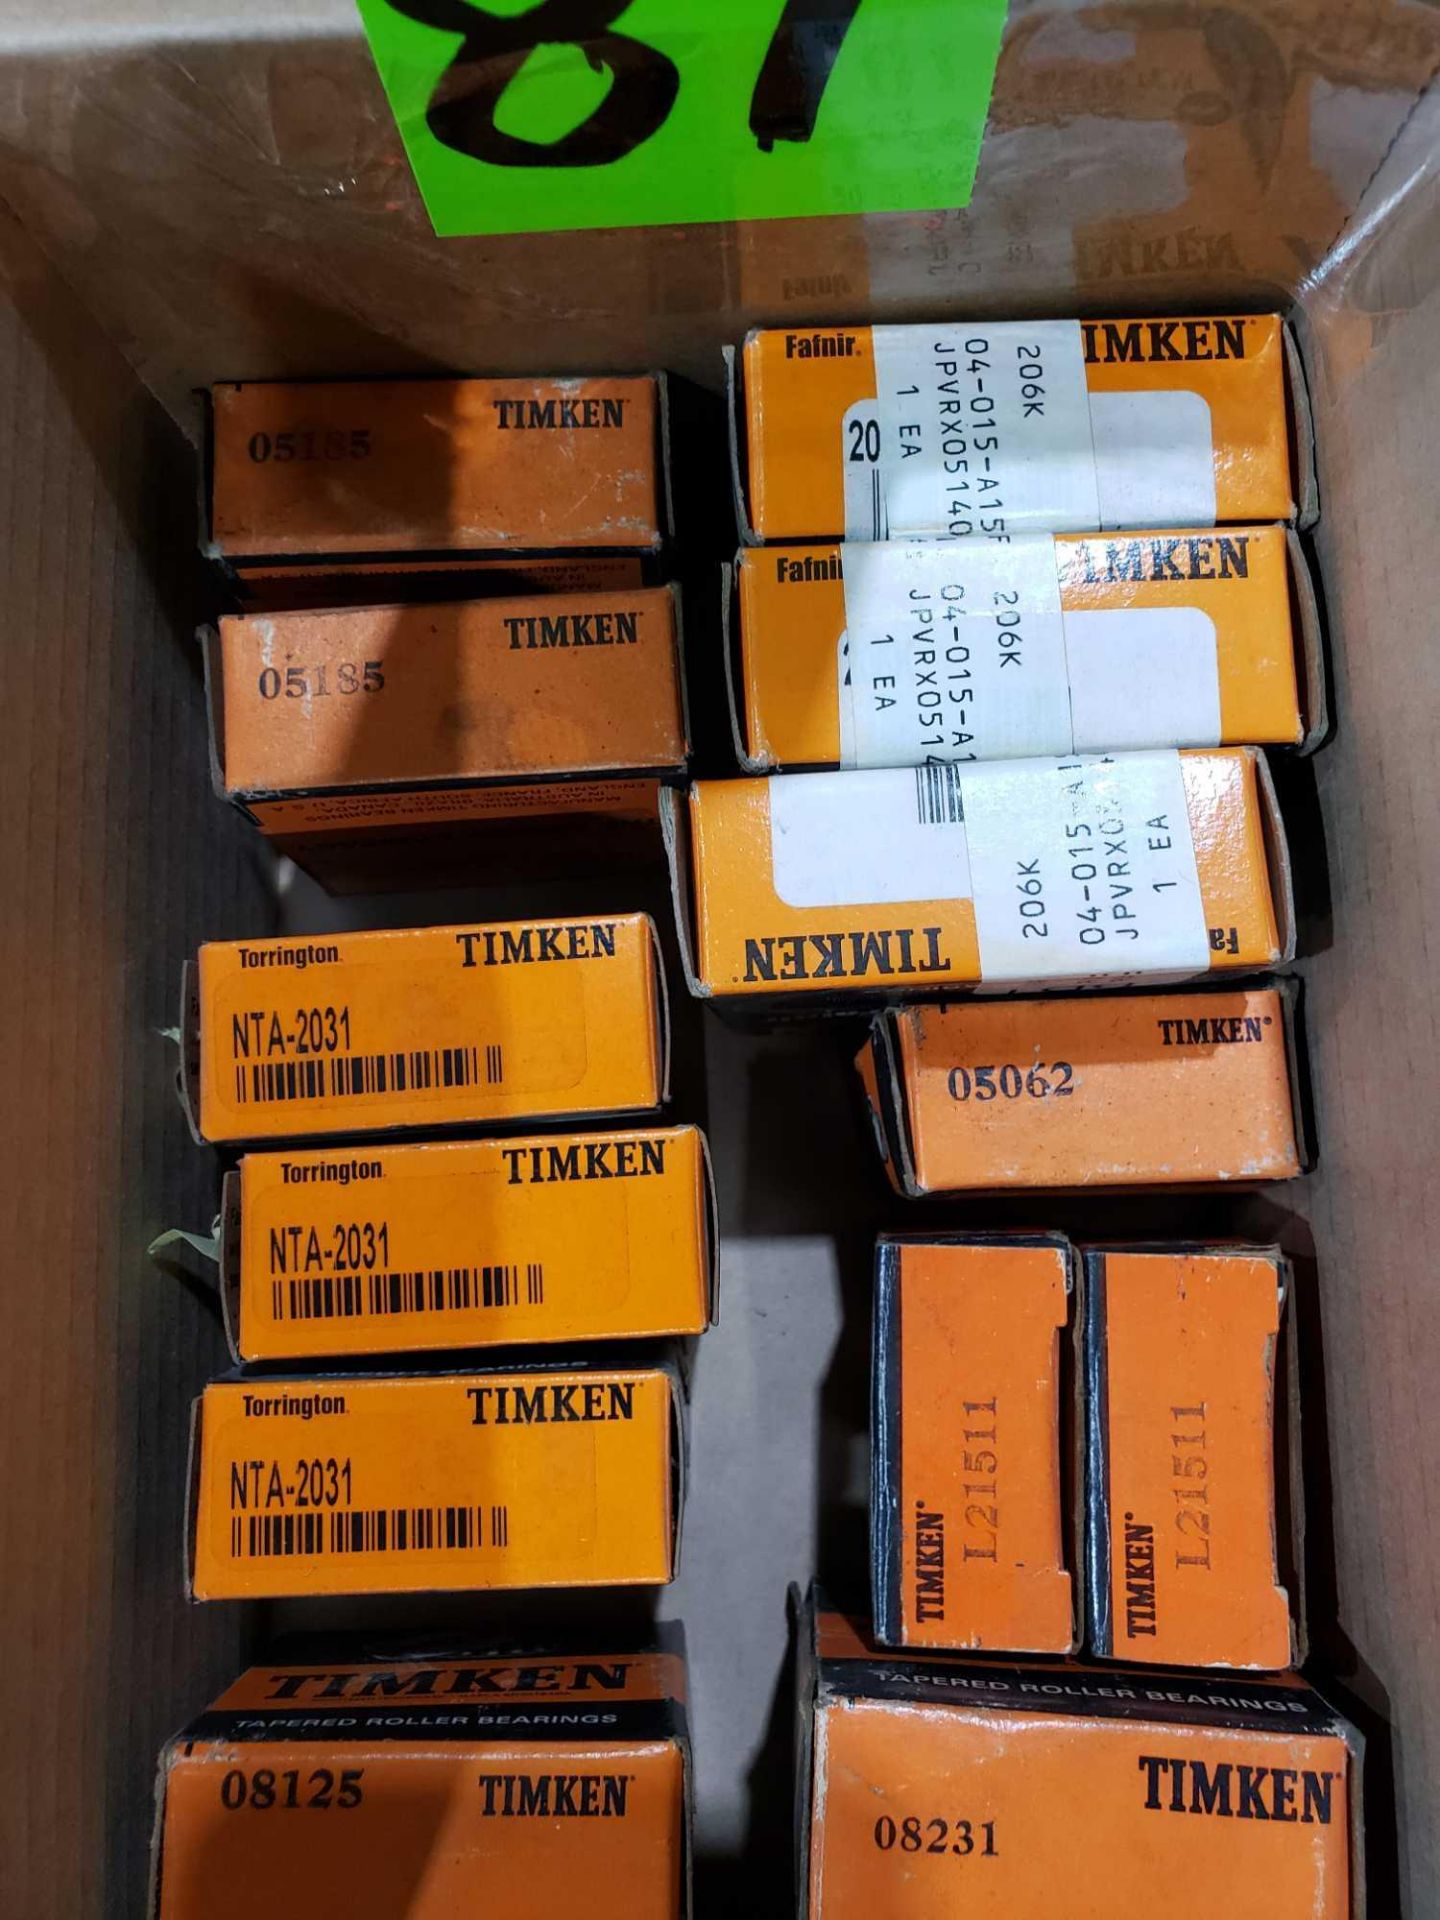 Qty 19 - Timken bearings, assorted part numbers. New in boxes as pictured. - Image 2 of 3